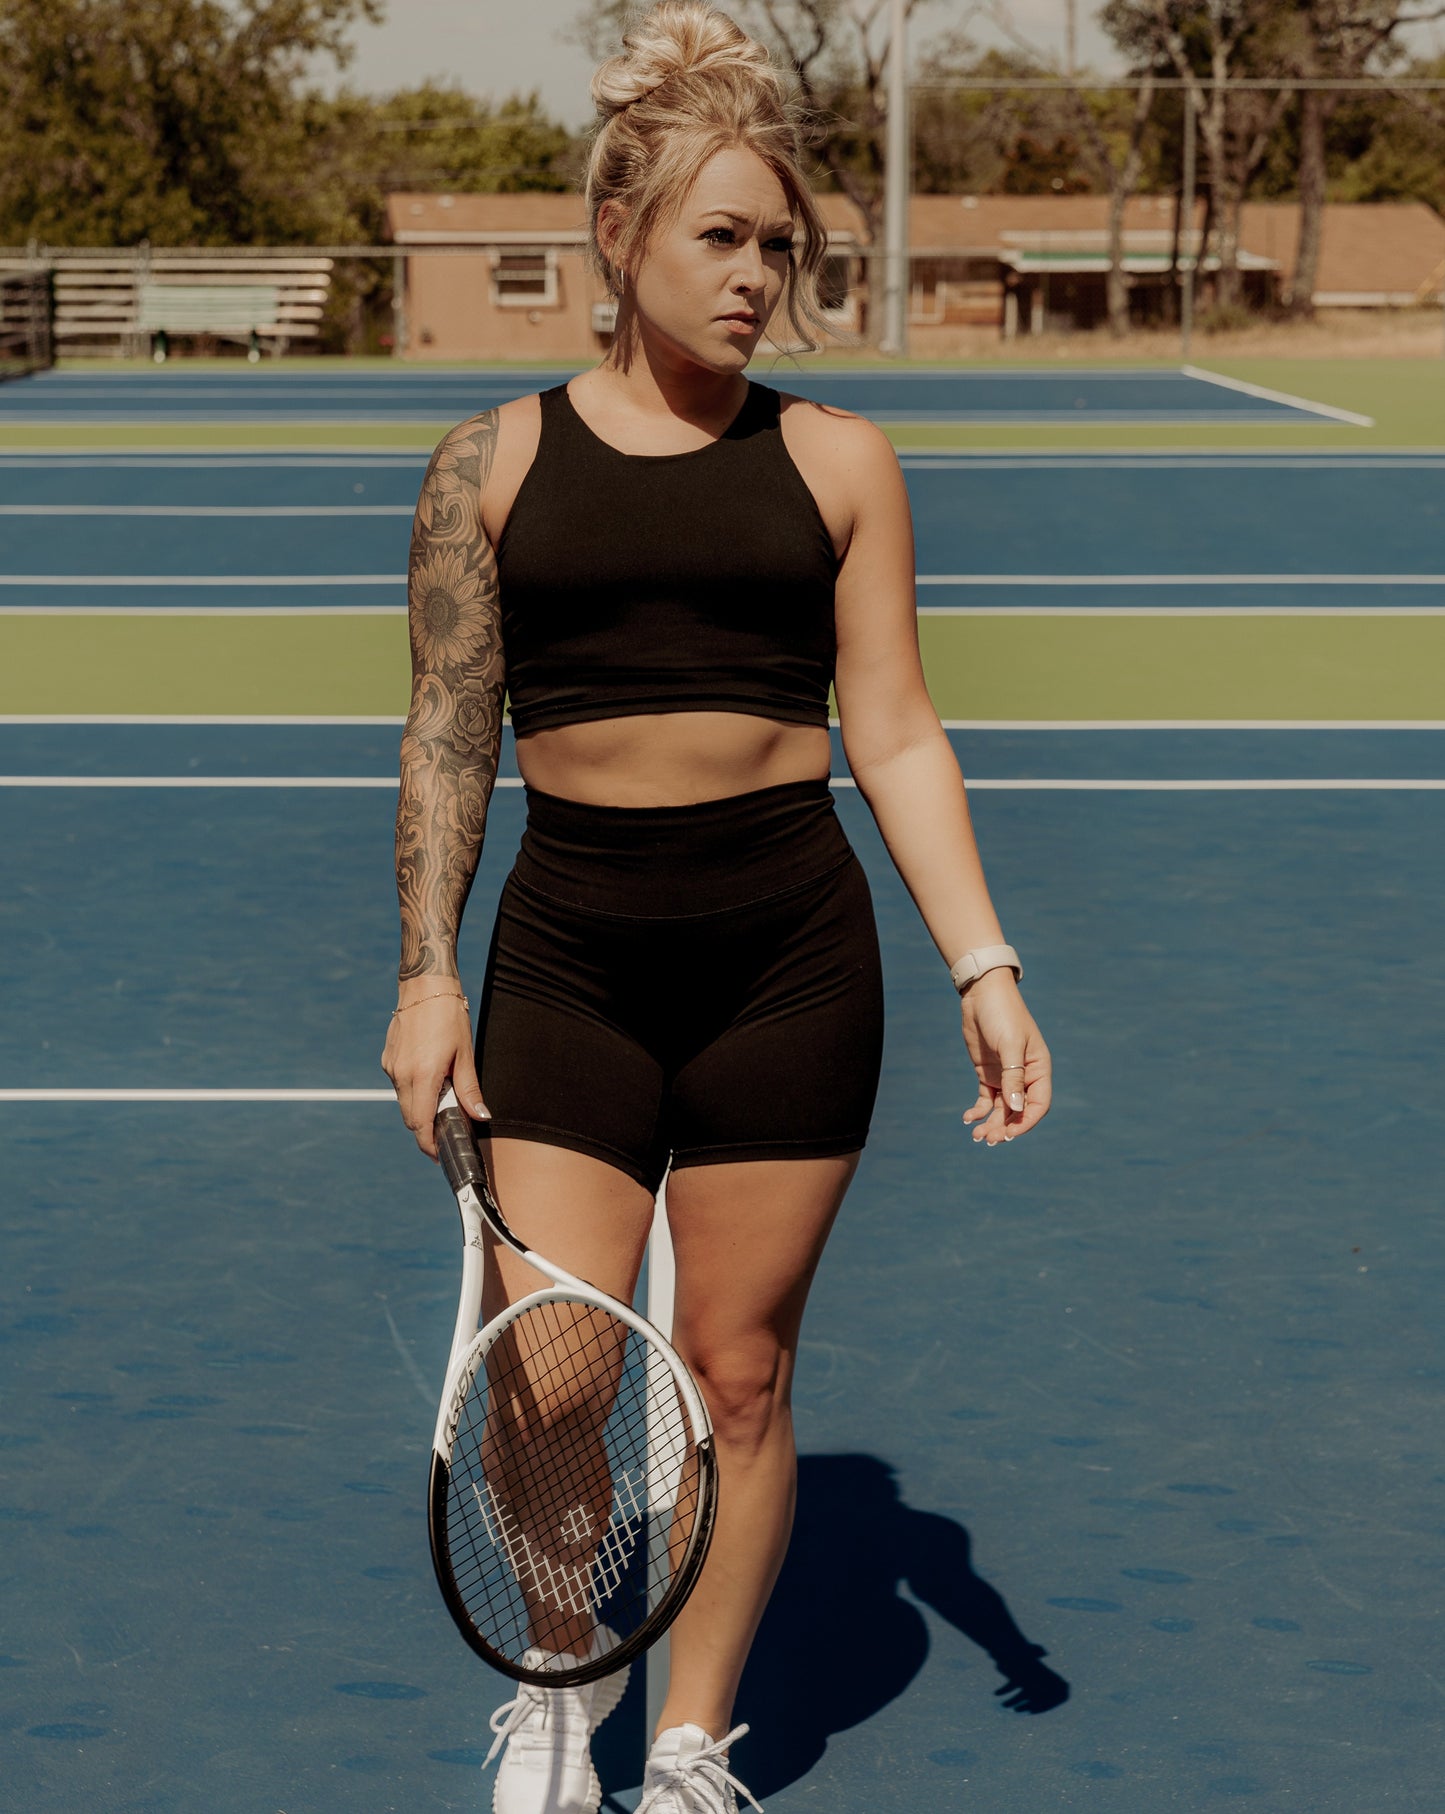 Blonde haired women wearing a matching workout set.  Which includes a black tank top and black biker shorts.  She is holding a tennis racket and wearing white sneakers standing on a tennis court.